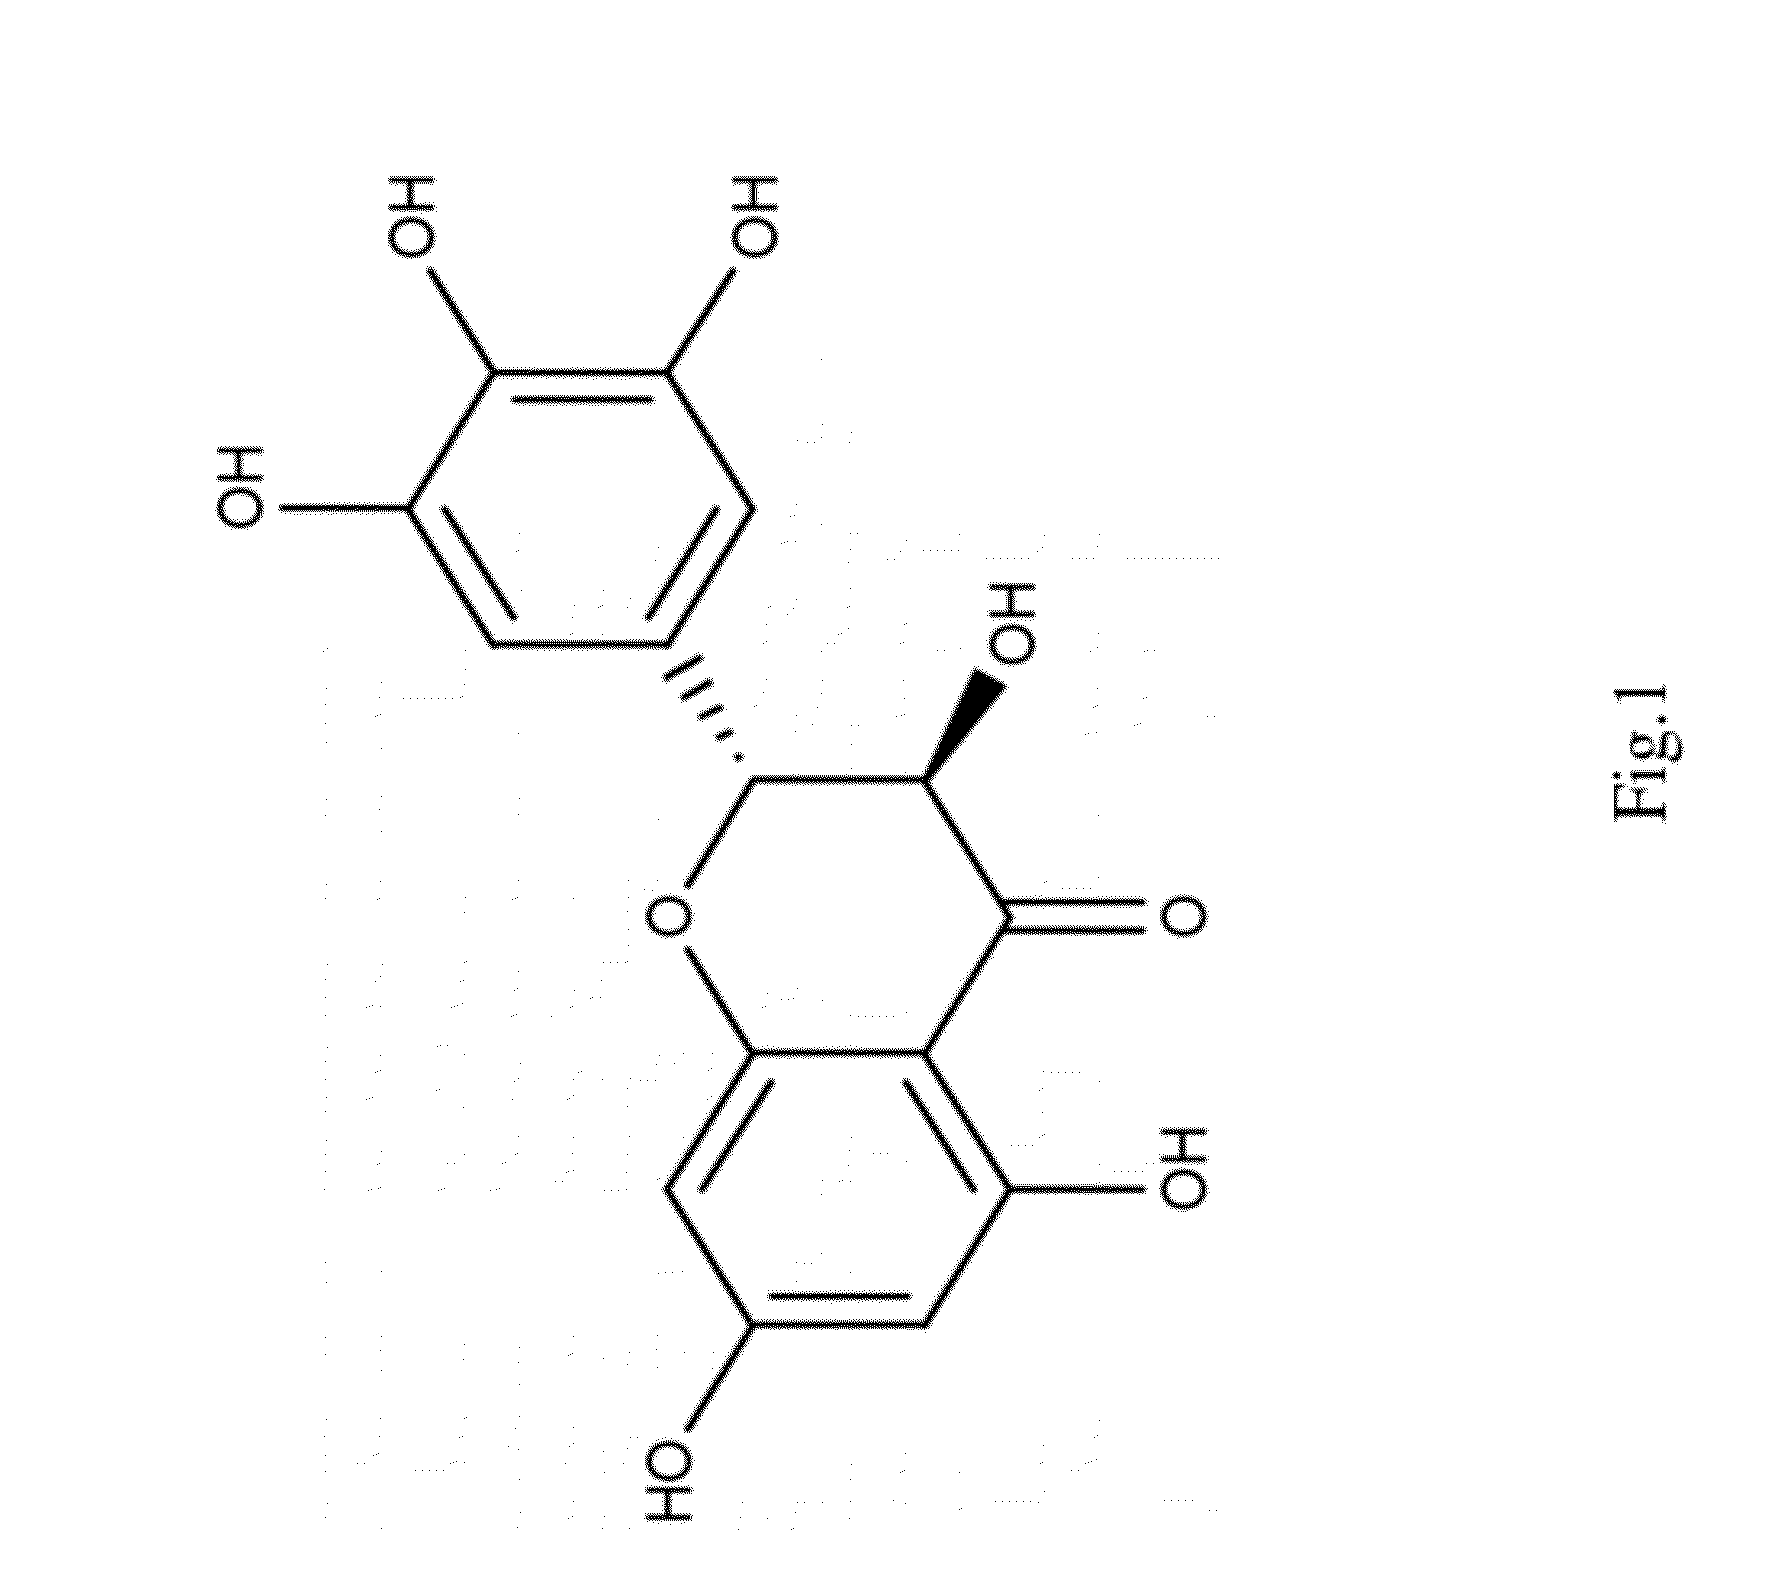 Dihydromyricetin as an IKK-beta inhibitor used for treatment of arthritis, cancer and autoimmune conditions, and other diseases or disorders